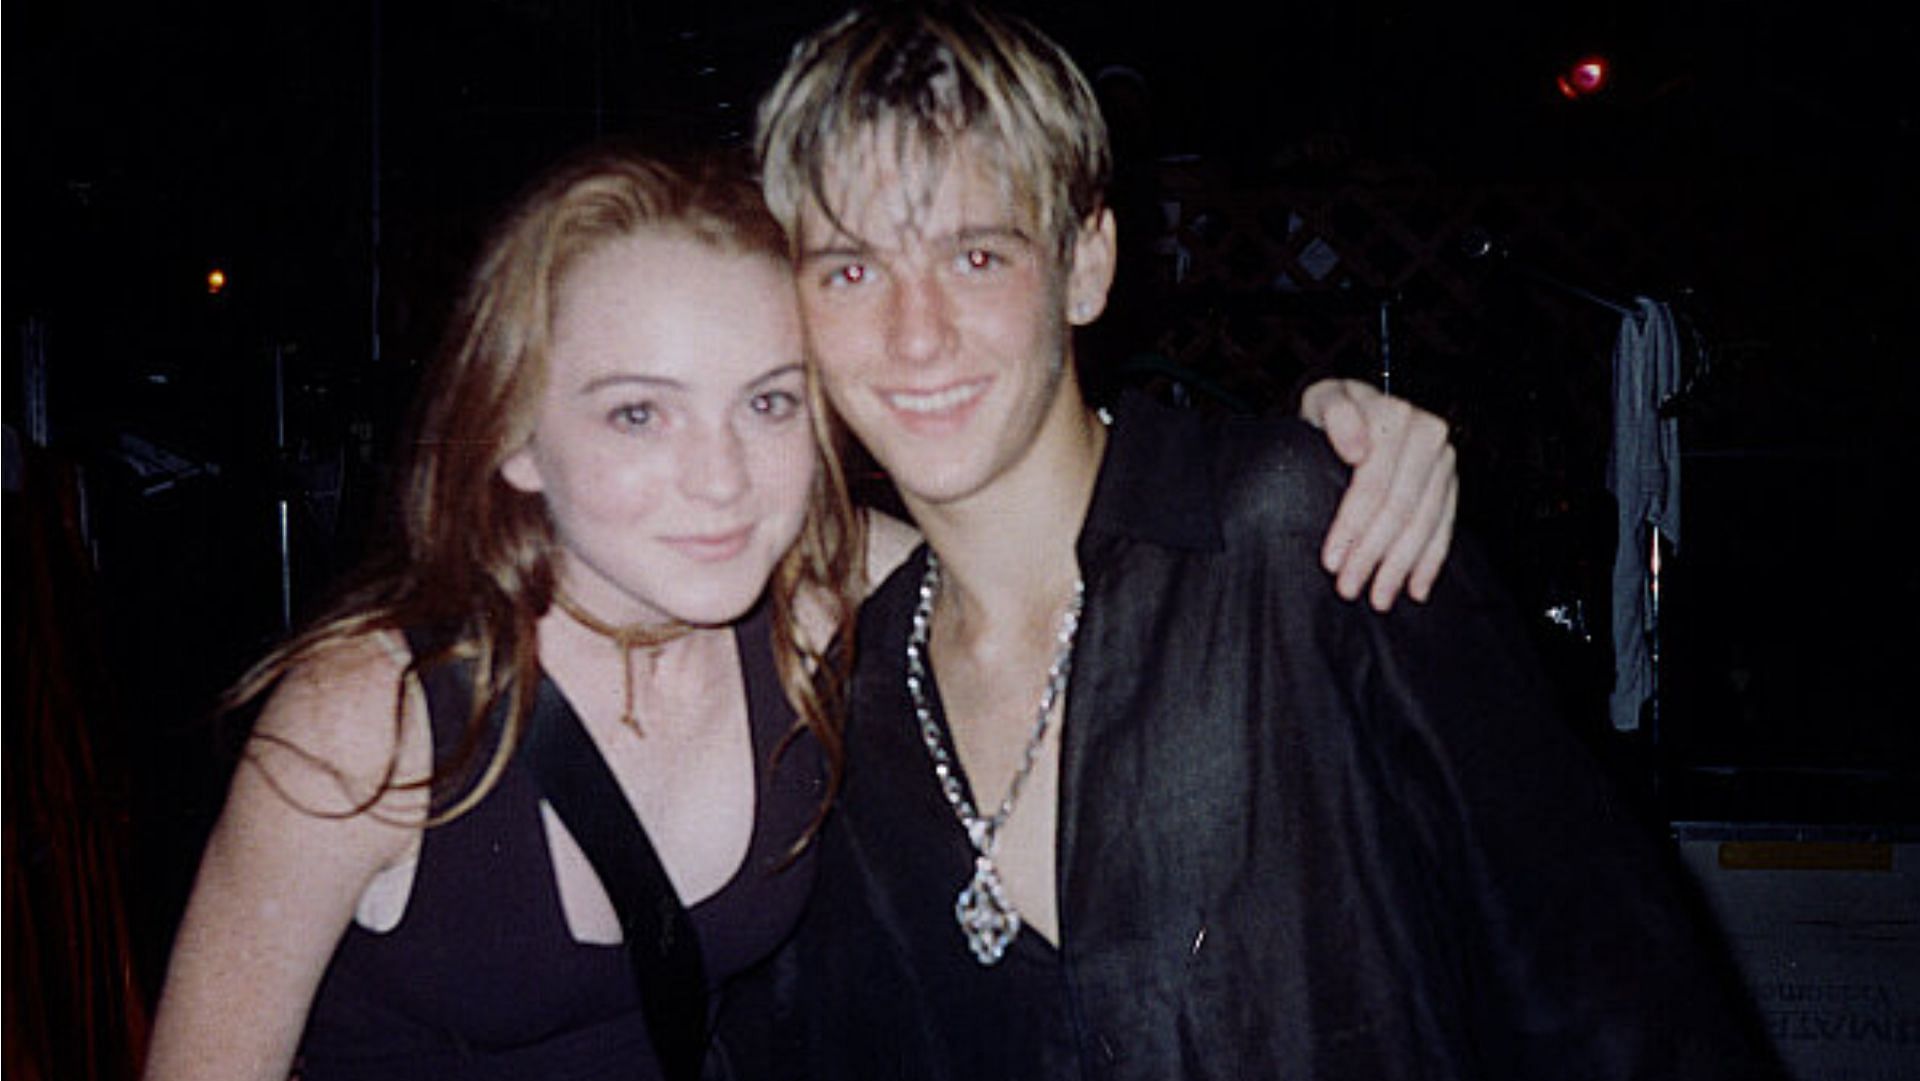 Aaron Carter and Lindsay Lohan dated in the early 2000s. (Image via @lavitalohan/Twitter)